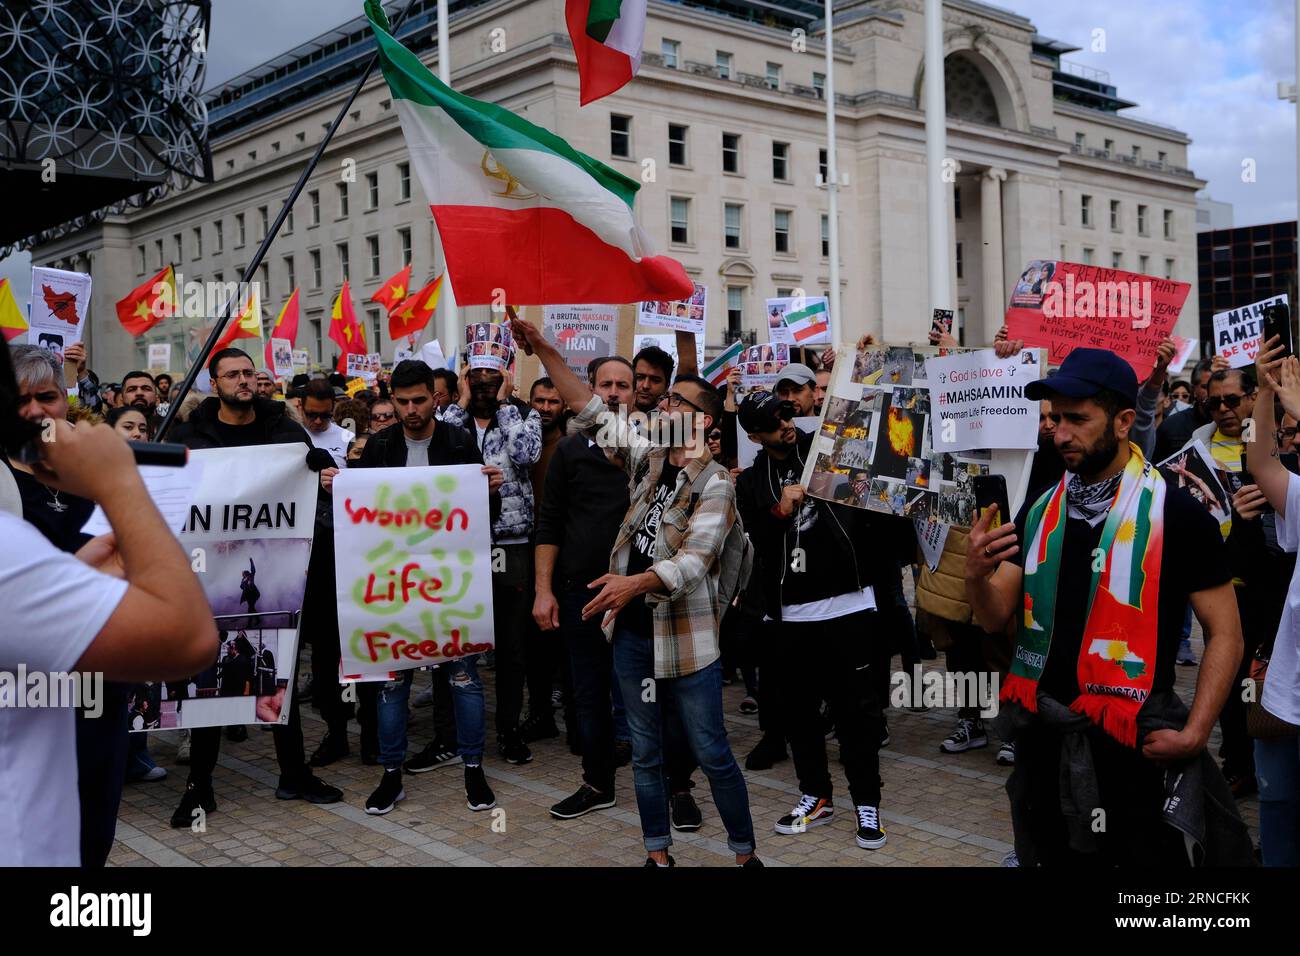 Victoria Square, Birmingham, UK. 2nd Oct 2022. Protesters gather to show their anger at the death of Mahsa Amini. Credit Mark Lear / Alamy Stock Photo Stock Photo